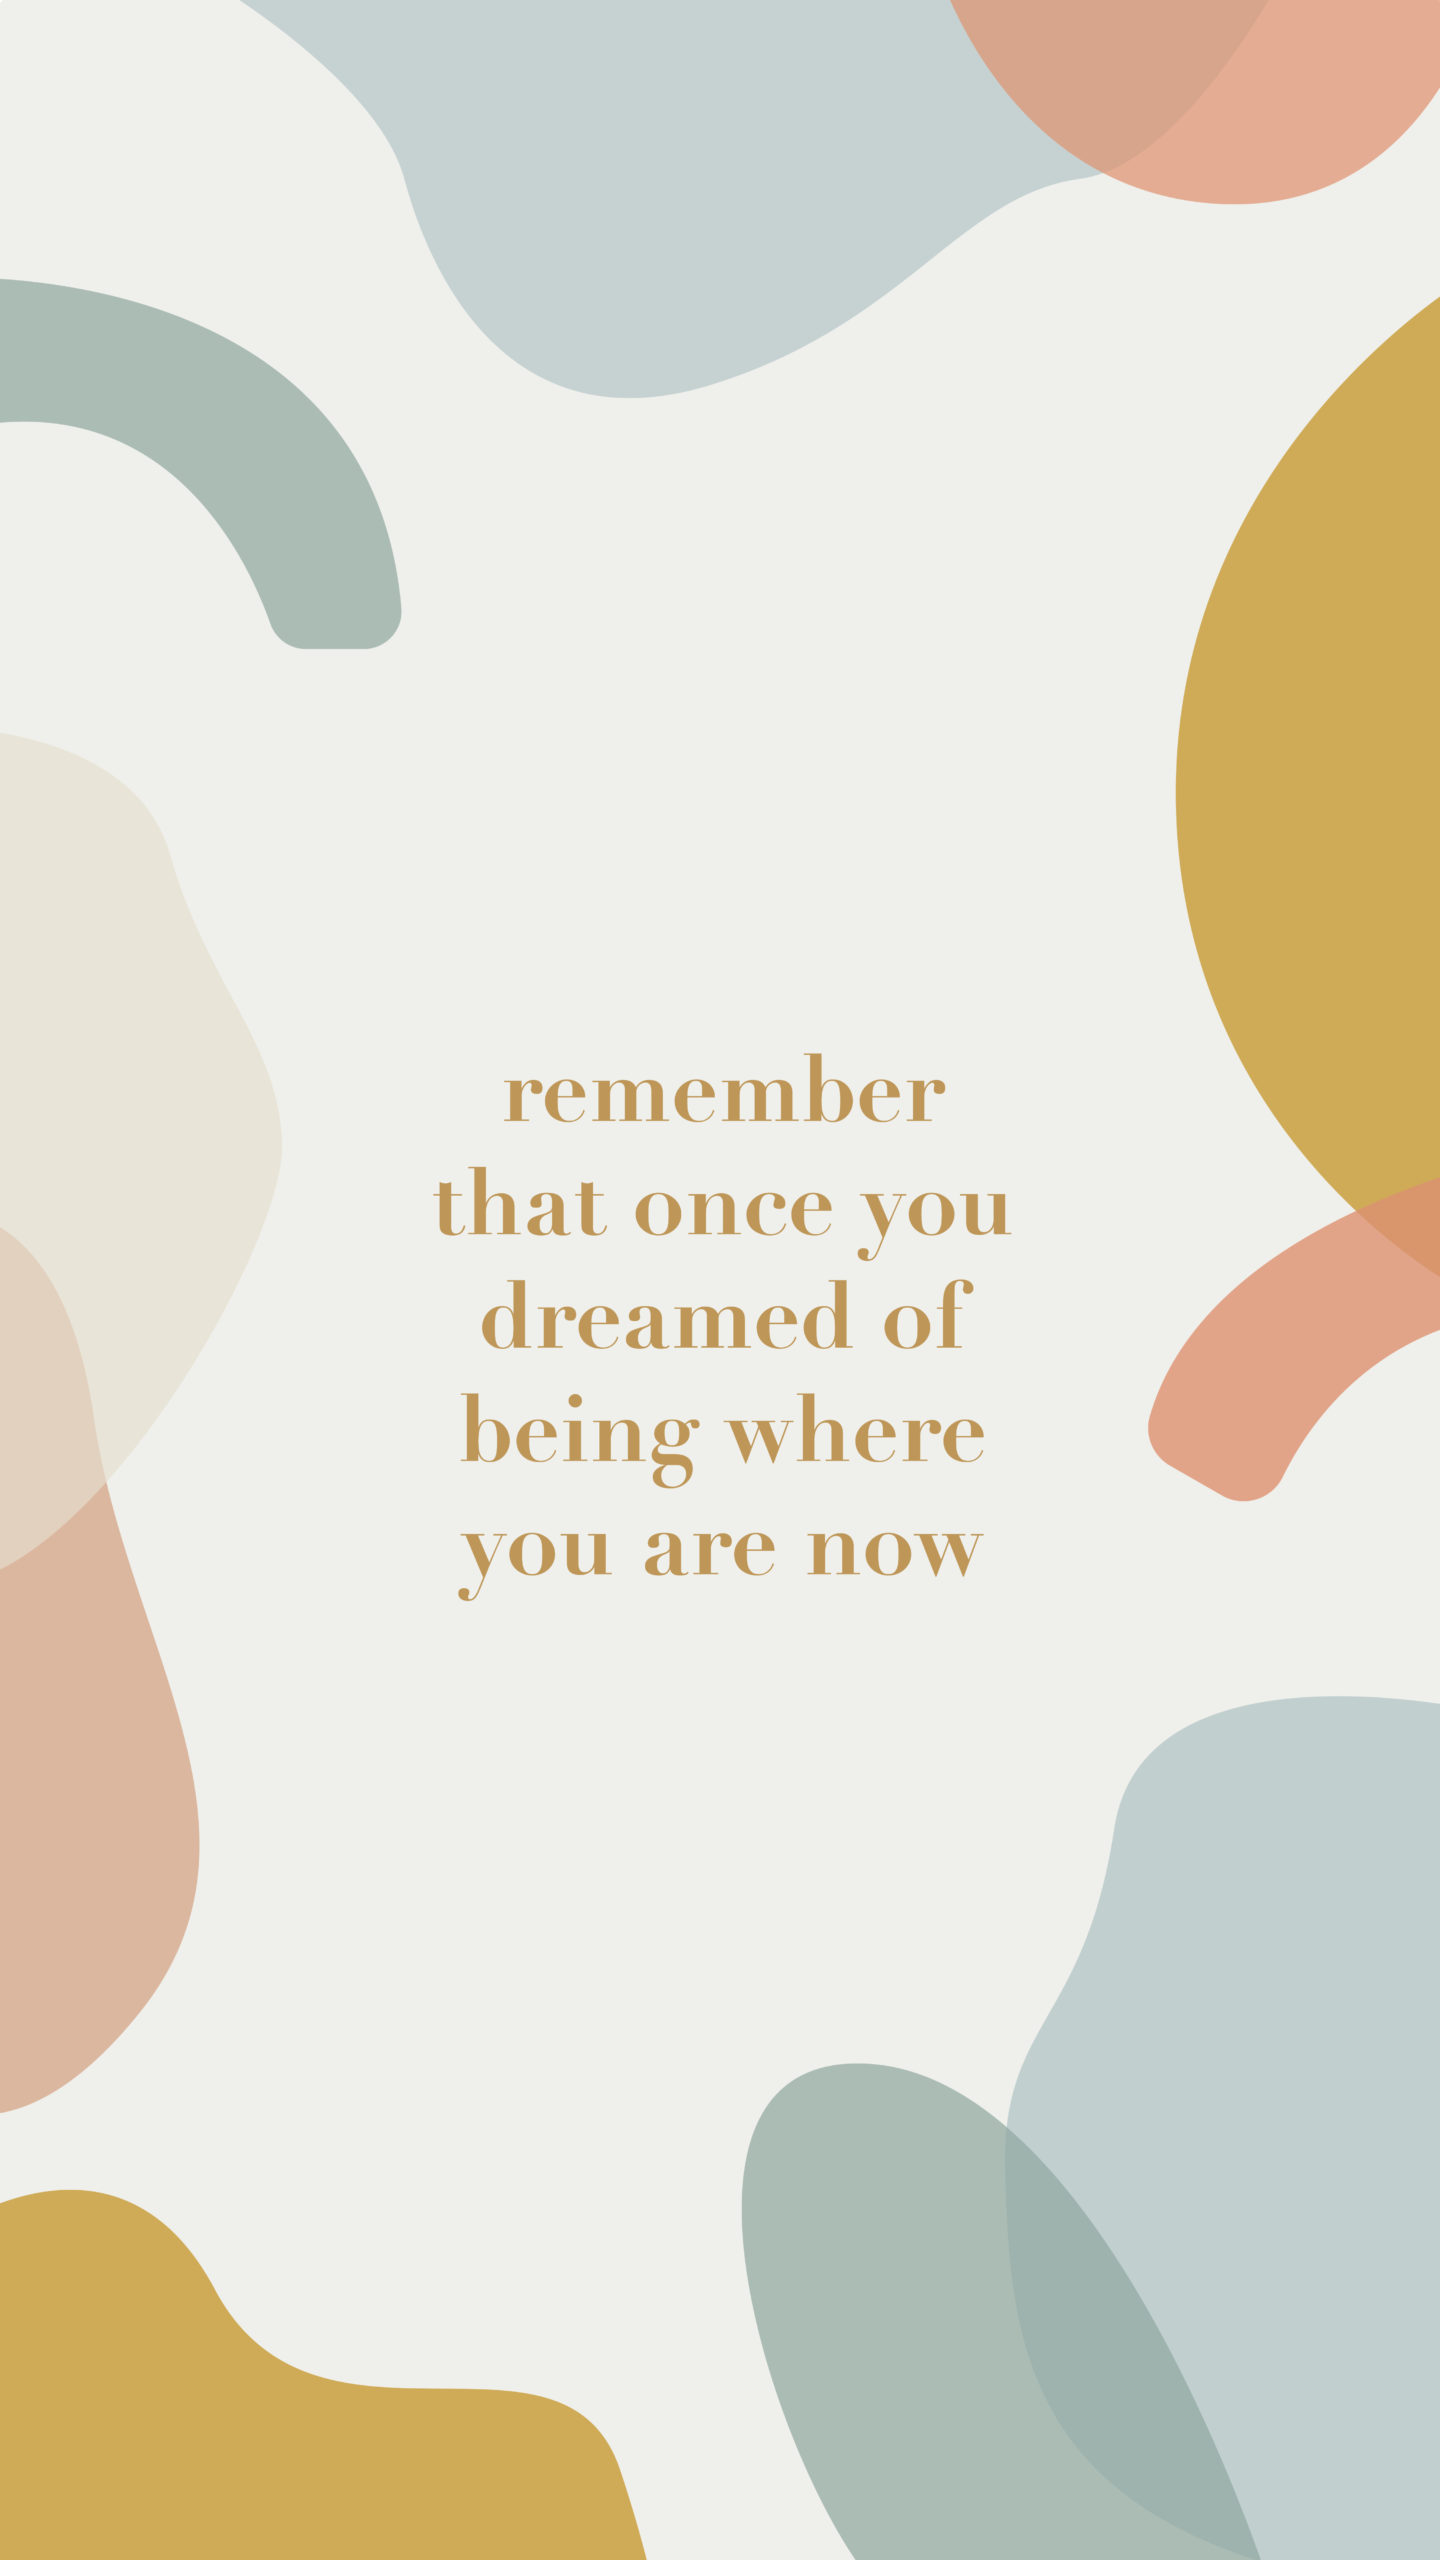 Remember That Once You Dreamed of Being Where You Are Now